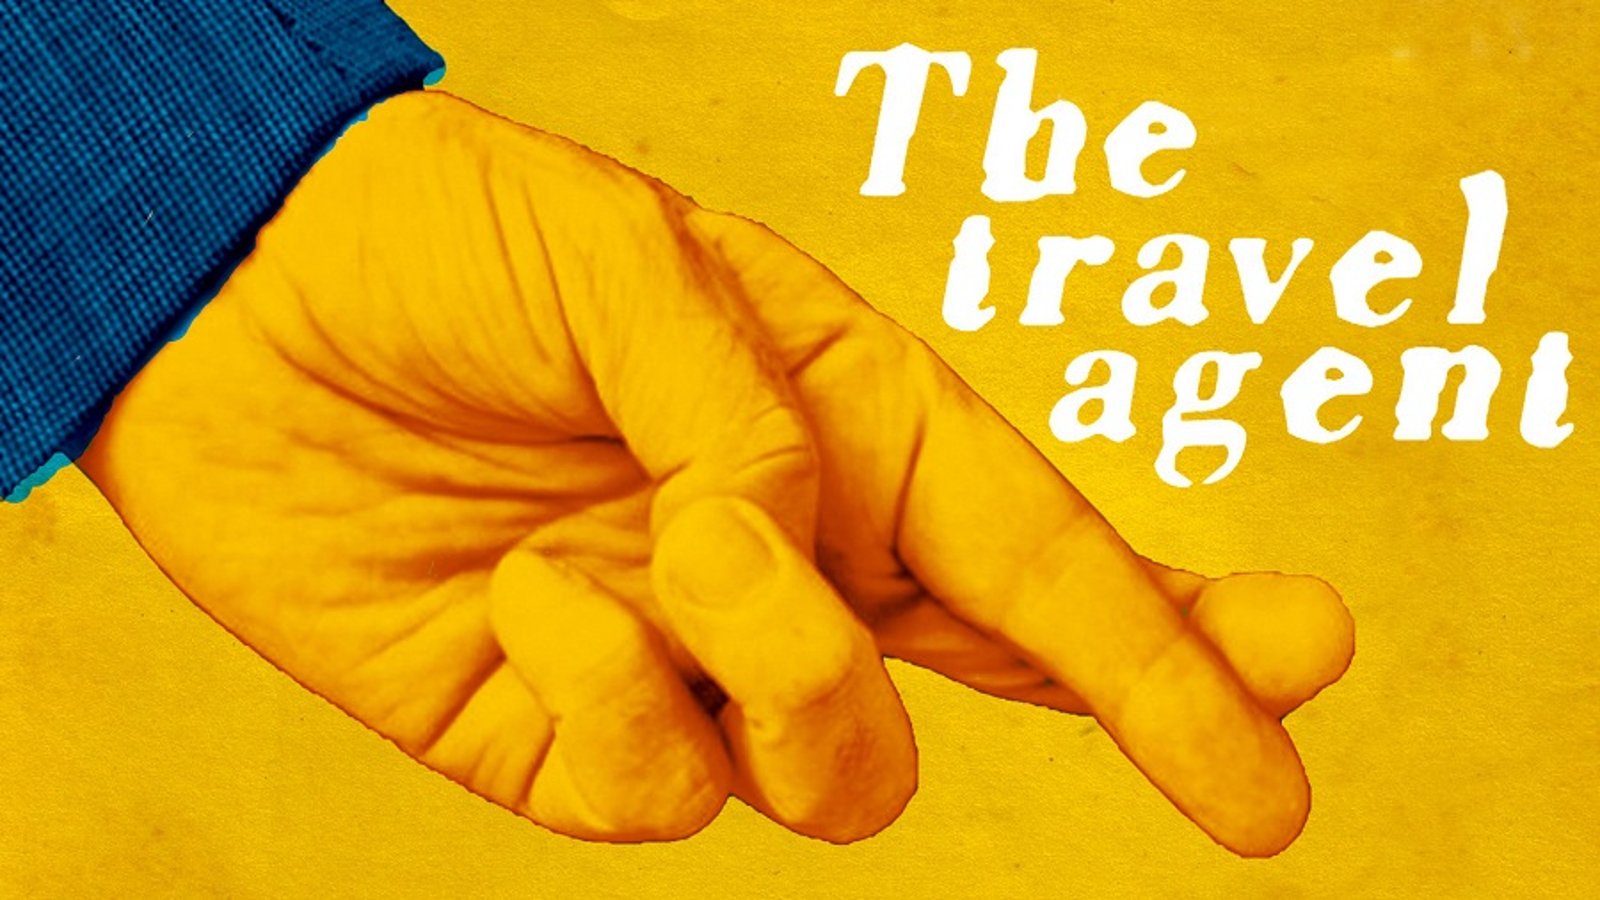 The Travel Agent